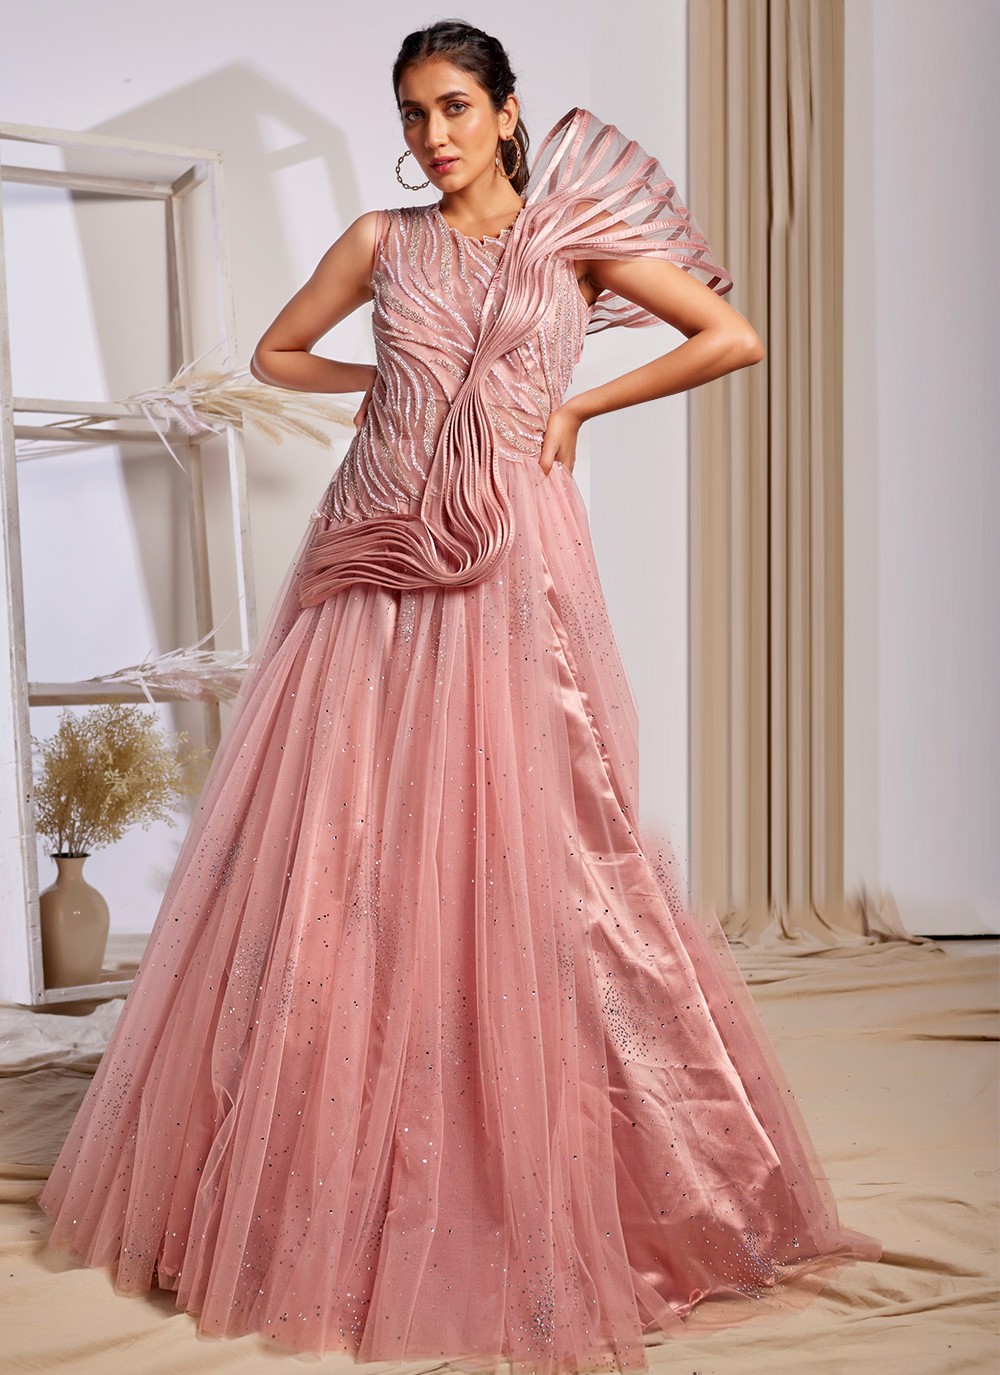 CLASSIC PINK FAUX BLOOMING DESIGNER GOWN FOR WOMEN